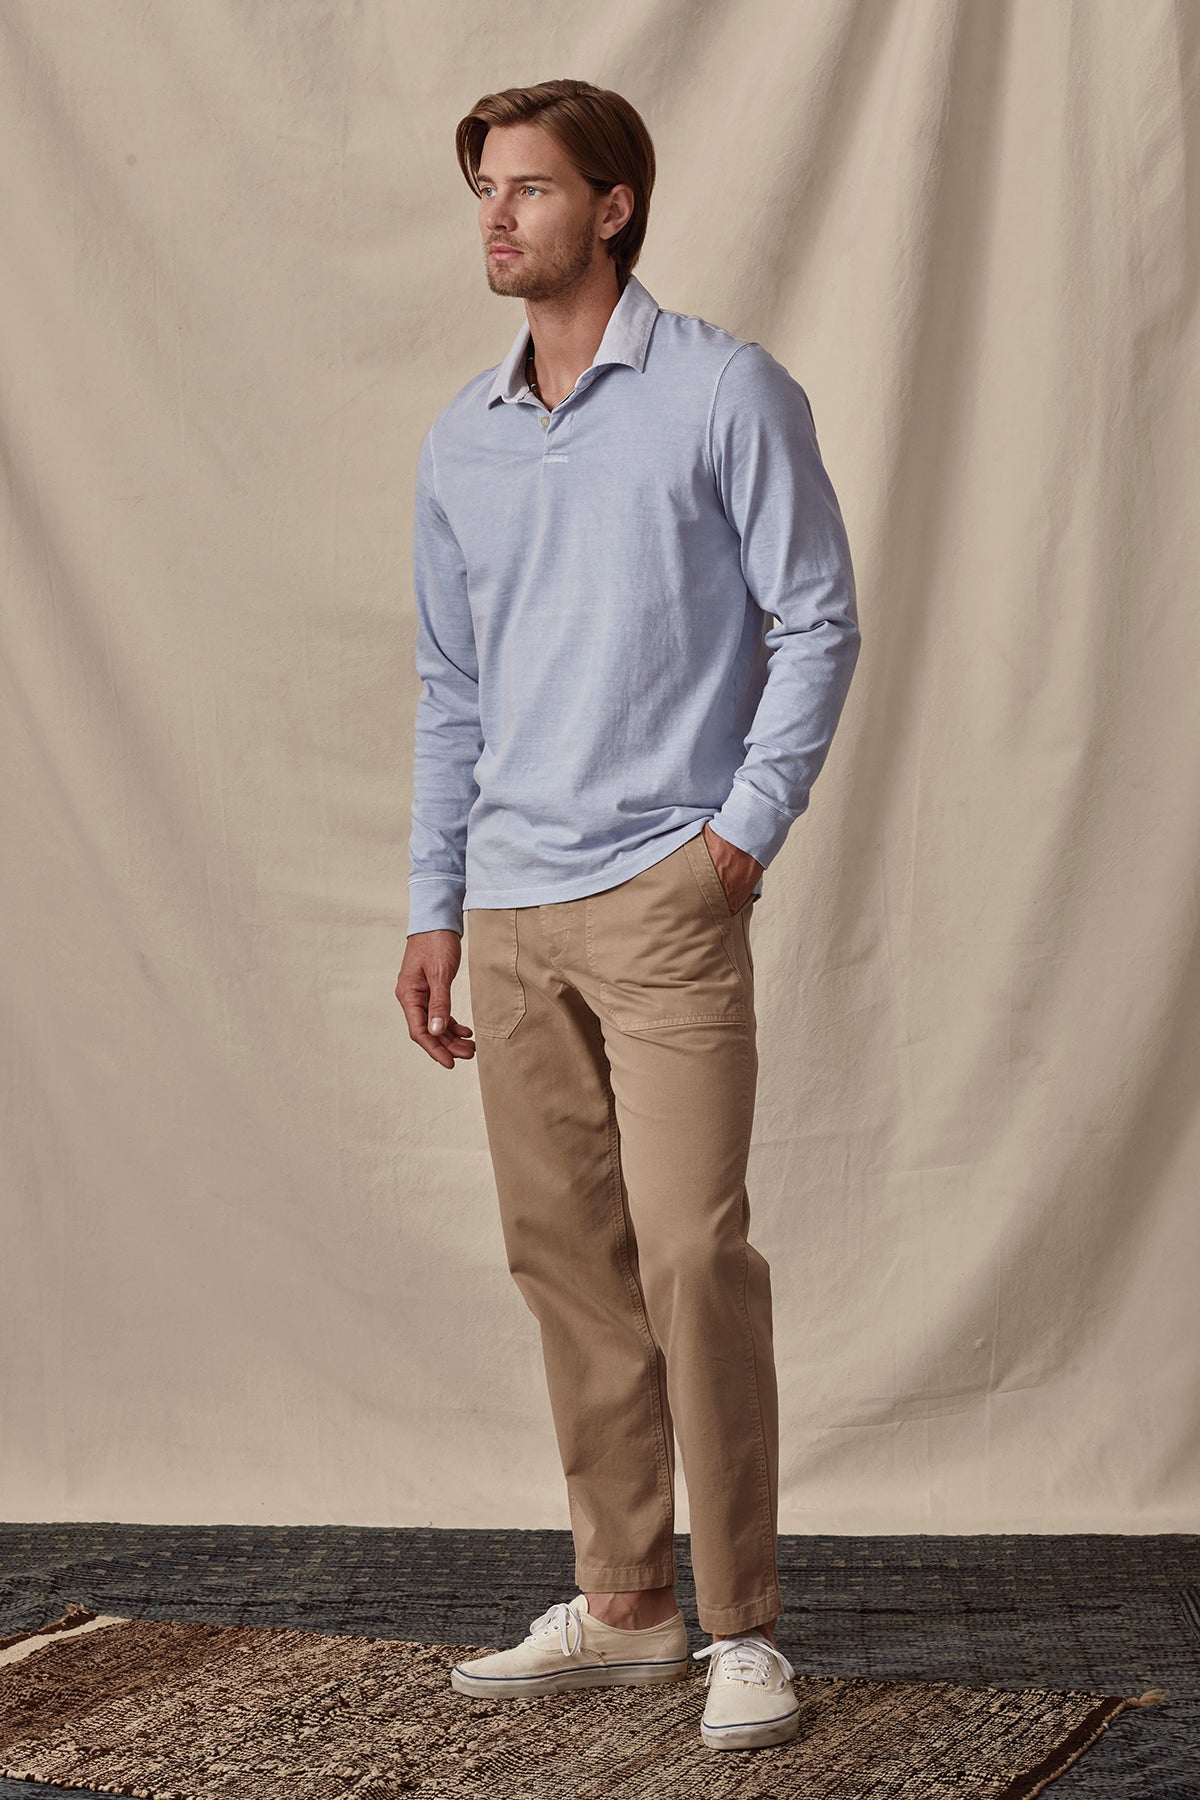 A man wearing a Velvet by Graham & Spencer BALTHAZAR HEAVY JERSEY POLO shirt and khaki pants.-36288613482689